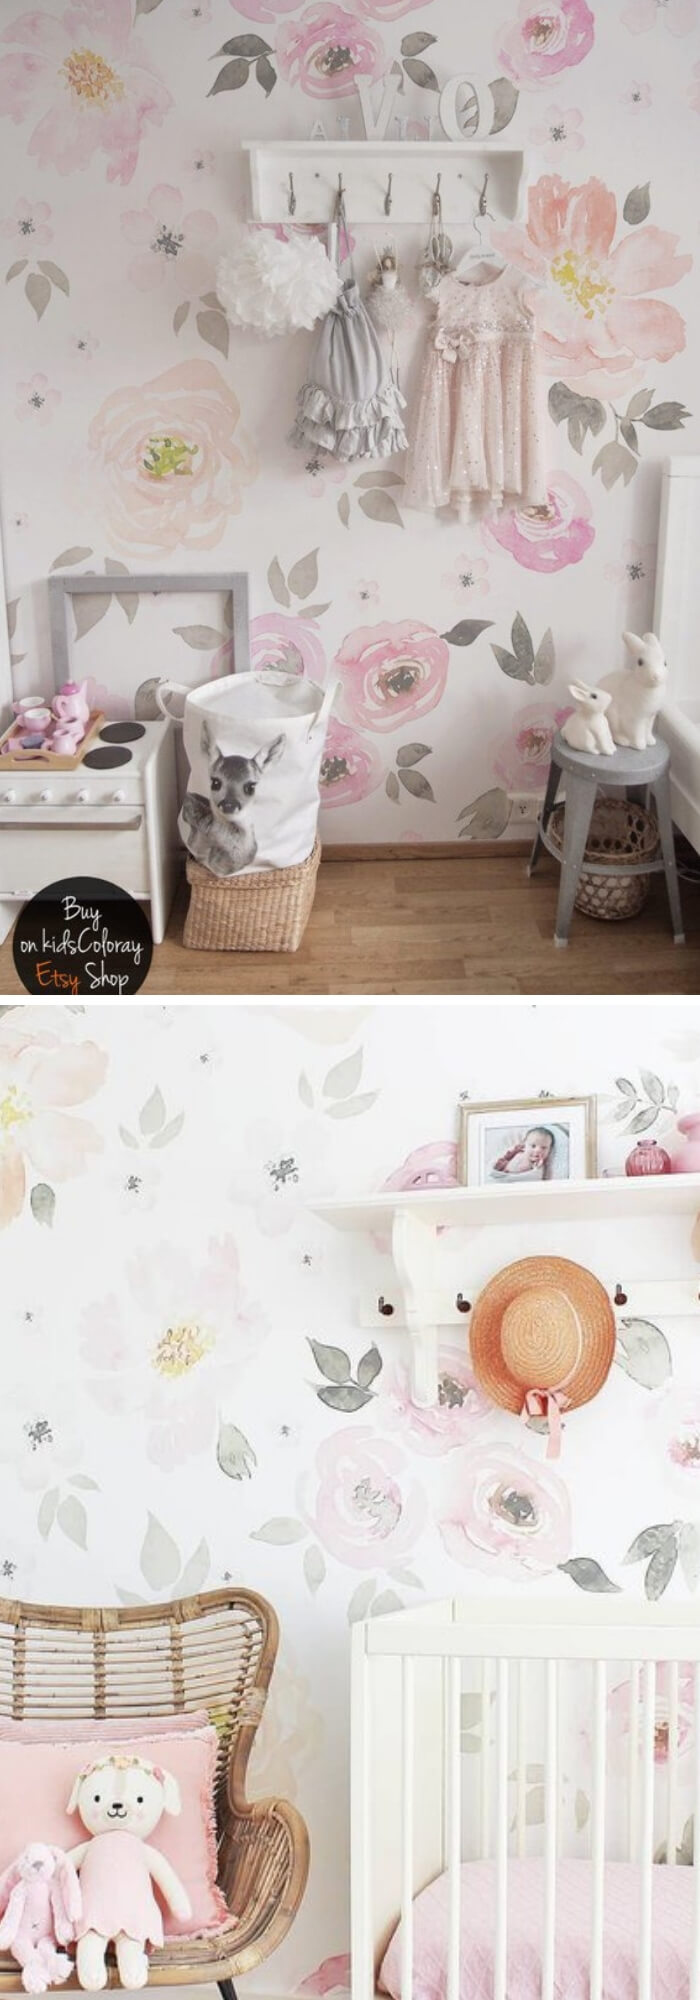 Home Decorating Ideas With Flowers: Vintage Floral wallpaper